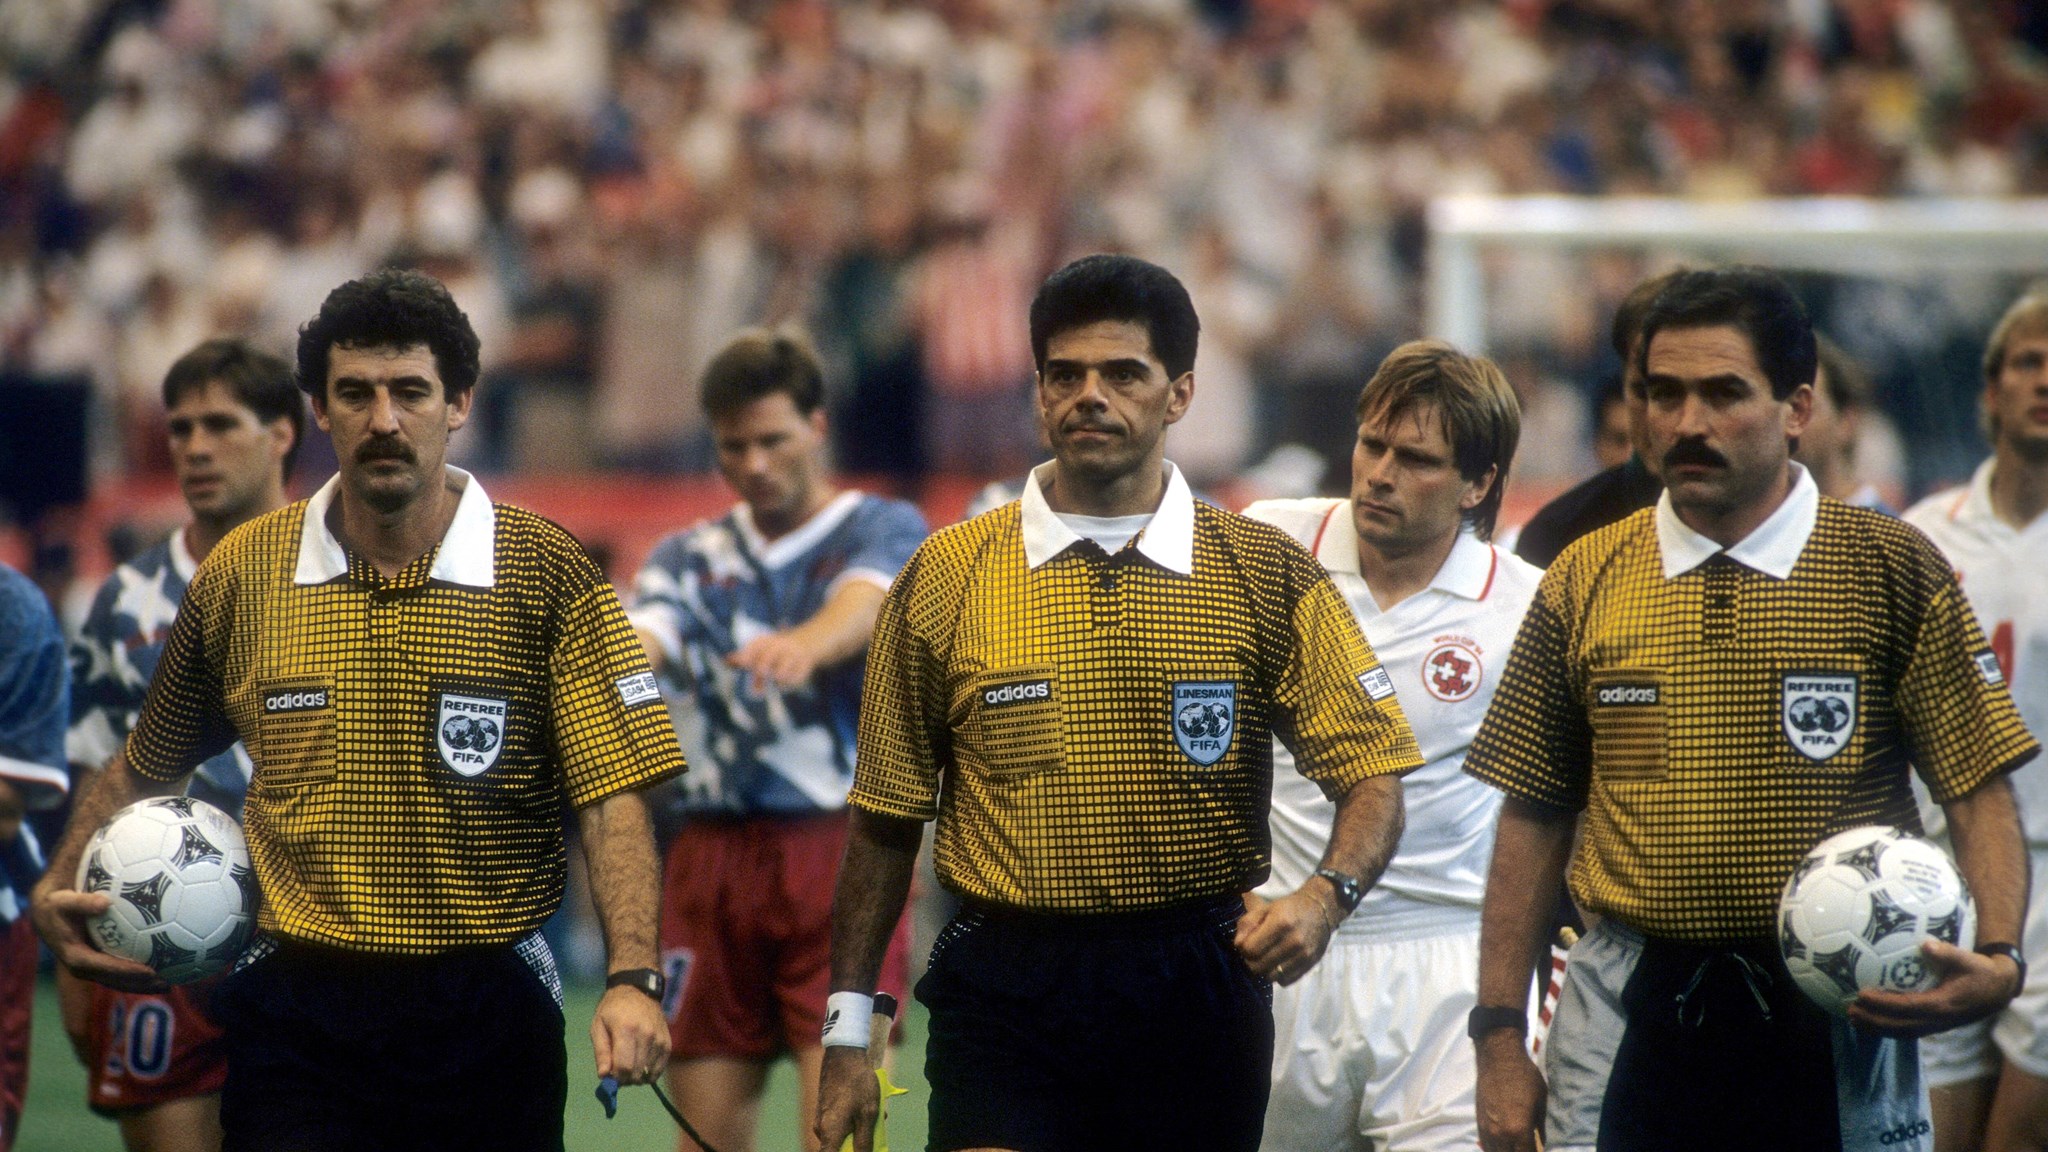 Football referees in USA 94